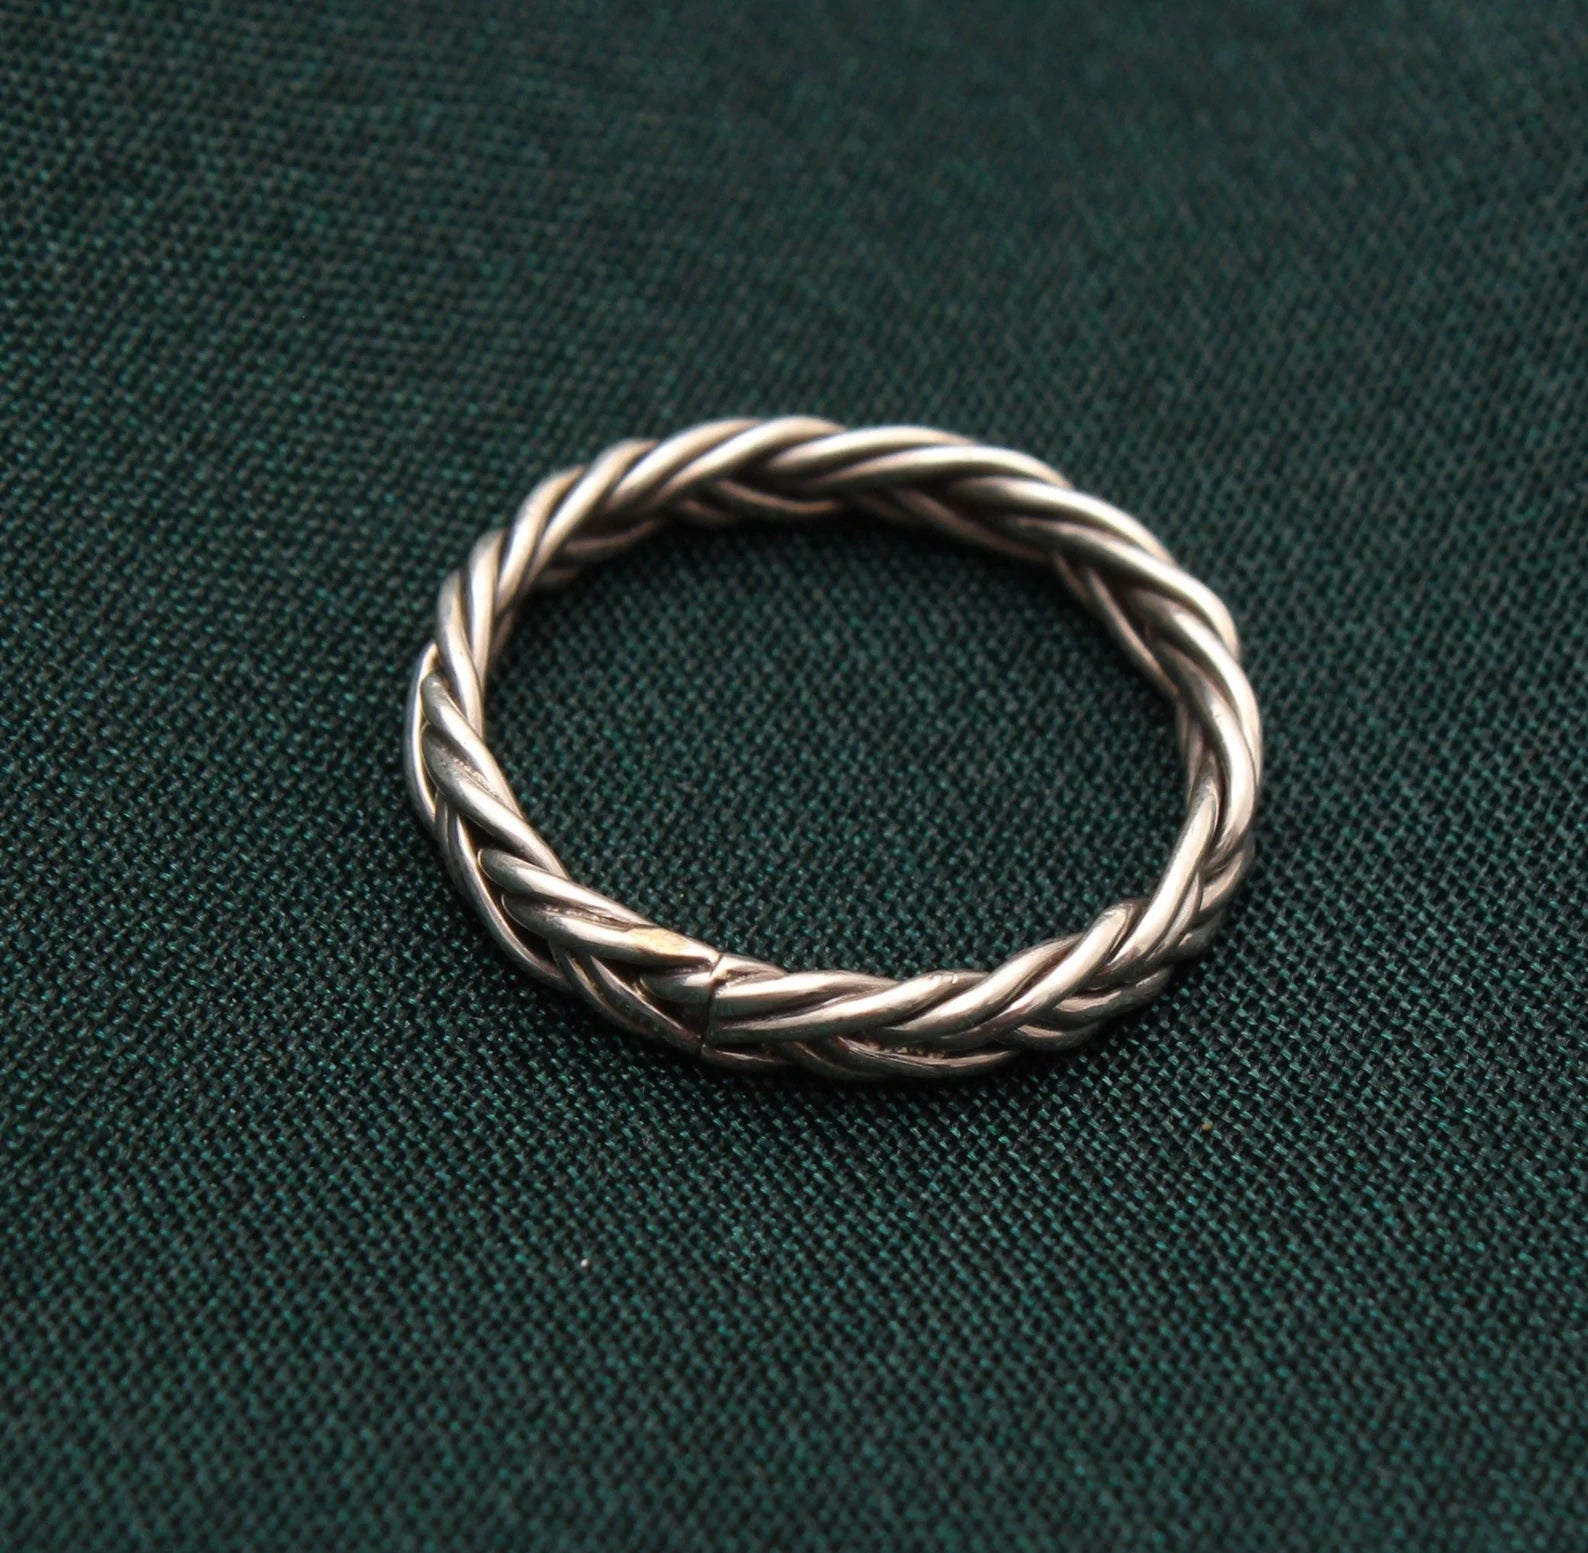 Double Braid Handmade Silver Band Ring ( 6 us ring size ) GemsRush